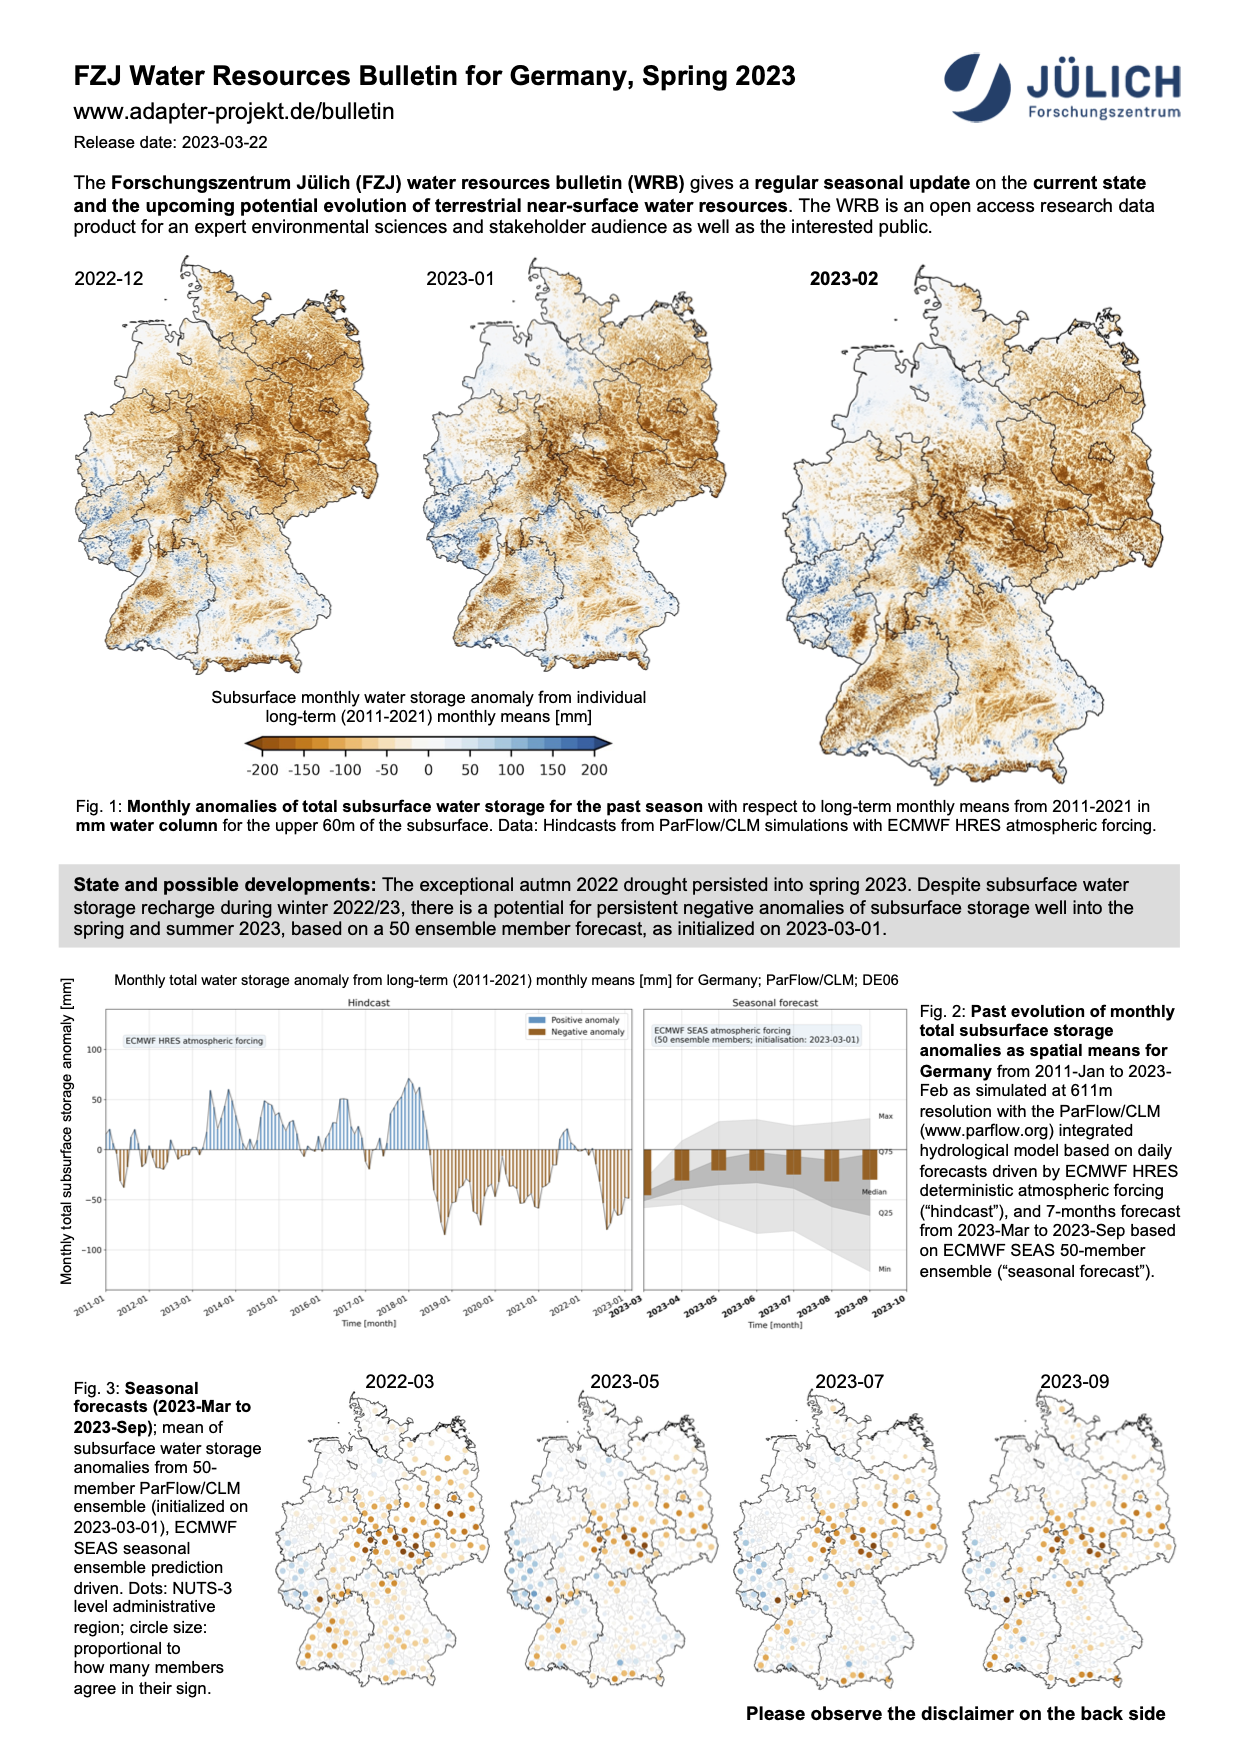 FZJ Experimental Water Resources Bulletin for Germany Spring 2023